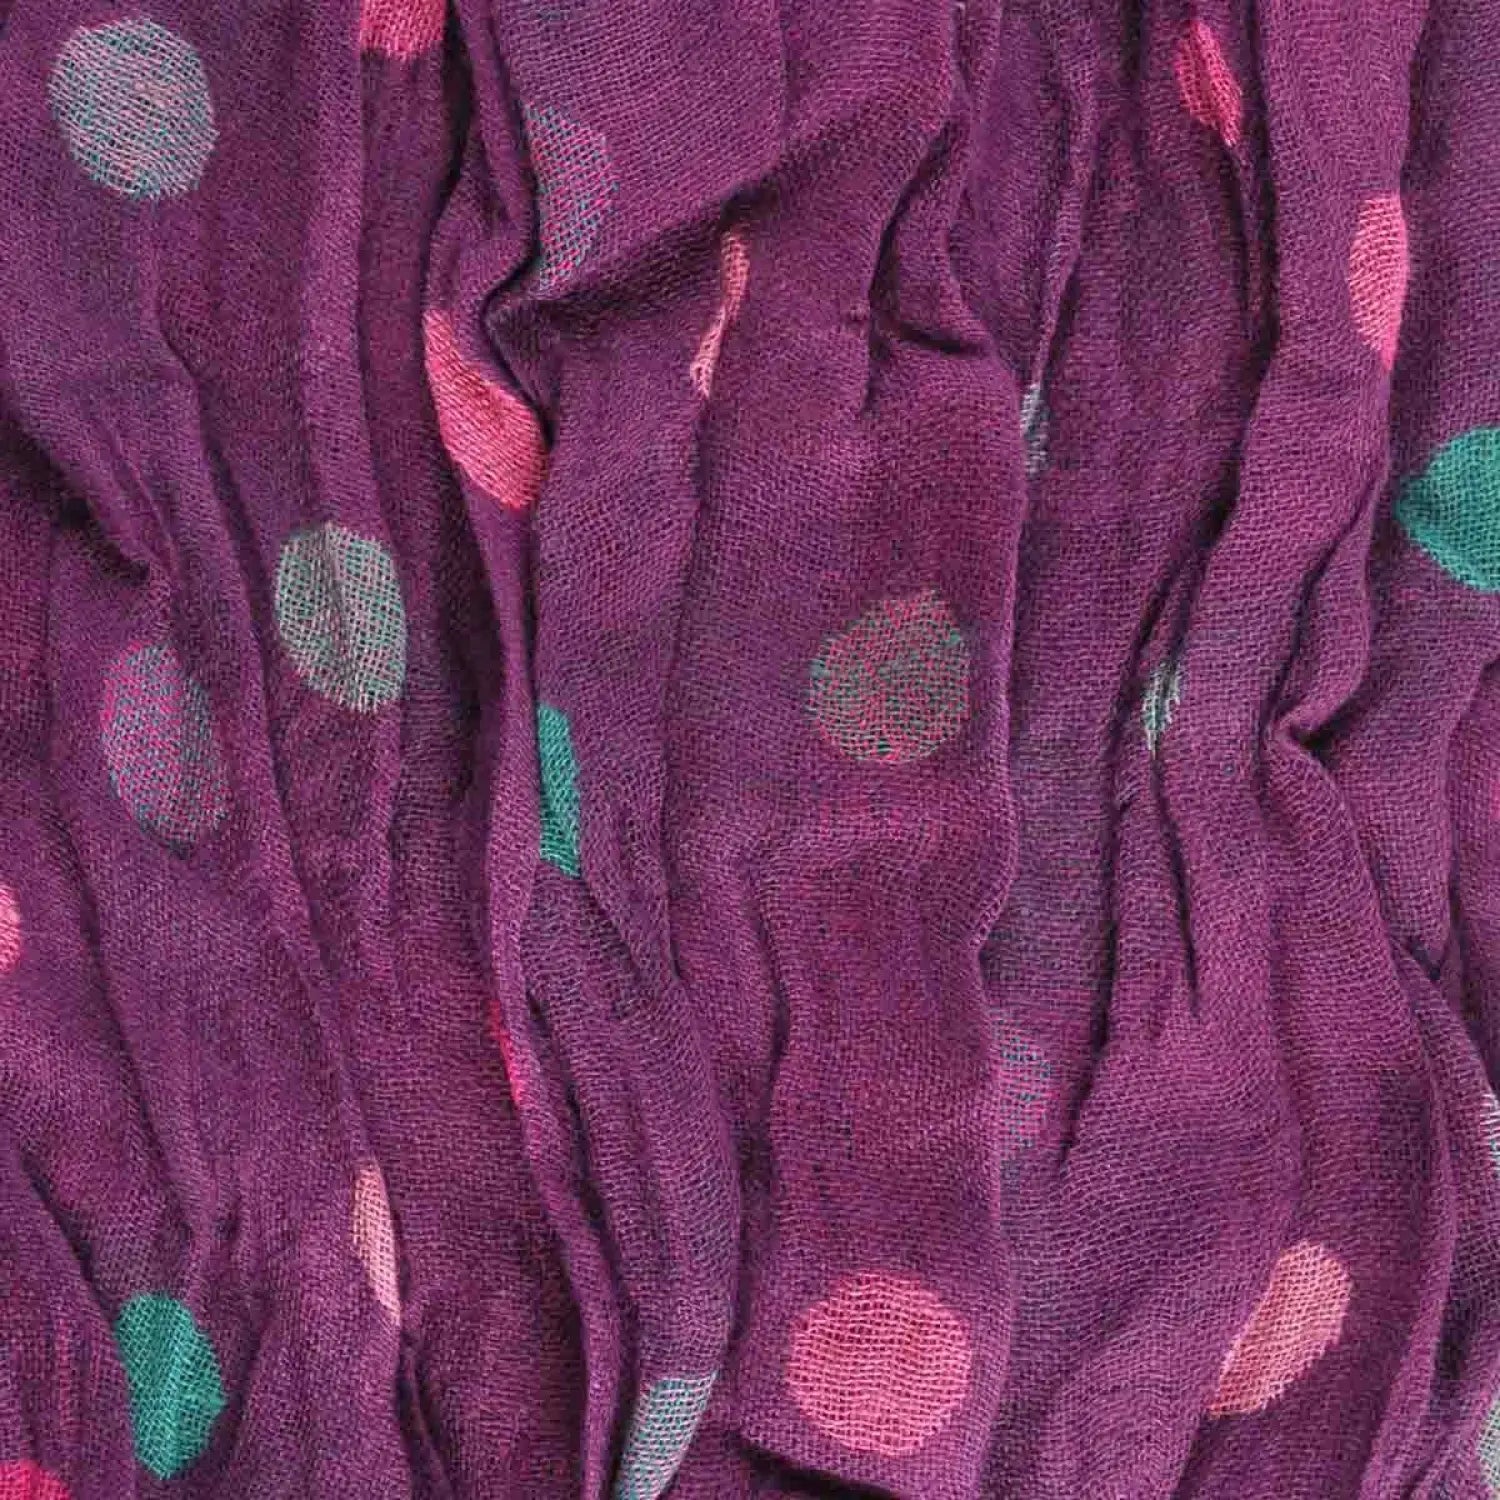 Crinkled Polka Dot Print Tasselled Long Soft Scarf in purple with multi colored spots.